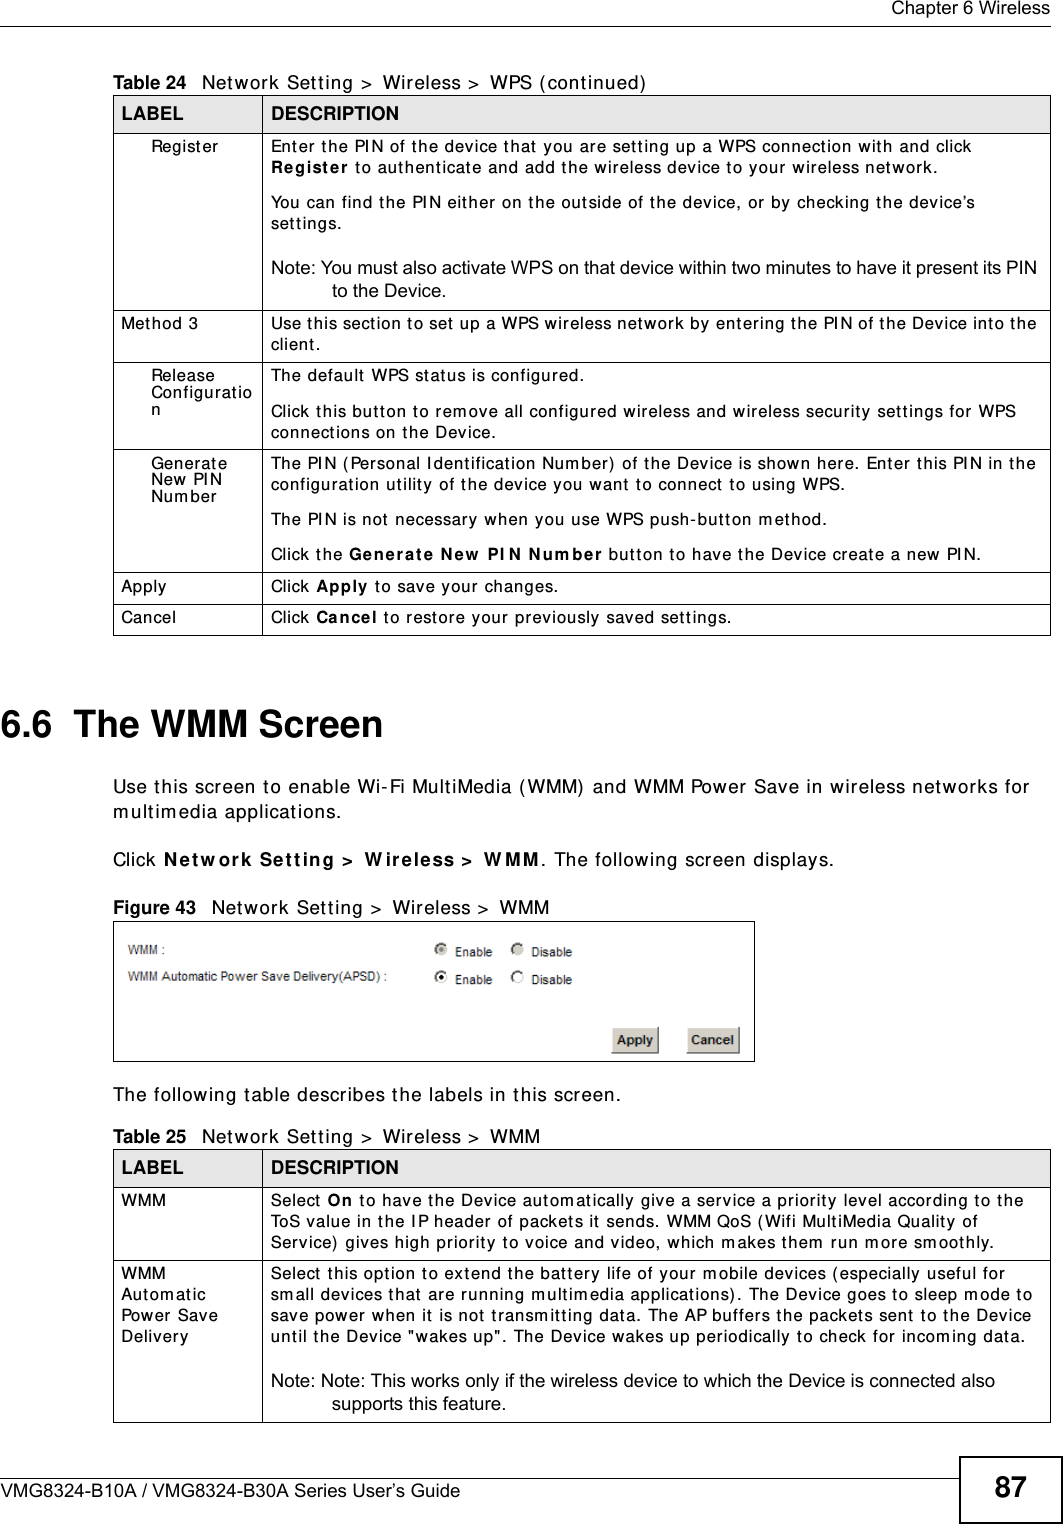  Chapter 6 WirelessVMG8324-B10A / VMG8324-B30A Series User’s Guide 876.6  The WMM ScreenUse t his scr een t o enable Wi- Fi Mult iMedia ( WMM)  and WMM Power Save in wireless net works for m ultim edia applicat ions.Click N et w or k  Set t ing &gt;  W ireless &gt;  W MM . The following screen displays.Figure 43   Net work Set t ing &gt;  Wireless &gt;  WMMThe following t able describes t he labels in this screen.Regist er Enter t he PI N of the device t hat  you are setting up a WPS connection w it h and click Re gist e r t o authent icat e and add the w ireless device t o your wireless net w ork.You can find t he PI N eit her on the out side of t he device, or by checking t he device’s set t ings.Note: You must also activate WPS on that device within two minutes to have it present its PIN to the Device.Met hod 3 Use this sect ion to set  up a WPS wireless net work  by entering t he PI N of t he Device int o t he client.Release Configurat ionThe default  WPS st at us is configured.Click t his but t on t o rem ove all configur ed wireless and wir eless security  set t ings for WPS connect ions on t he Device.Generat e New PI N Nu m berThe PI N ( Personal I dent ificat ion Num ber )  of the Device is shown here.  Ent er this PI N in the configurat ion ut ilit y  of t he device you want to connect  t o using WPS.The PI N is not  necessar y when you use WPS push- but t on m ethod.Click the Gen era t e N e w  PI N  N um be r  but t on to have t he Device create a new PI N. Apply Click Apply t o save your  changes.Cancel Click Cance l to rest or e your pr eviously saved set t ings.Table 24   Net work Sett ing &gt;  Wireless &gt;  WPS ( continued)LABEL DESCRIPTIONTable 25   Net work Sett ing &gt;  Wireless &gt;  WMMLABEL DESCRIPTIONWMM Select On  t o have t he Device aut om at ically give a ser vice a priority  level according to t he ToS value in t he I P header of pack et s it  sends. WMM QoS ( Wifi MultiMedia Qualit y of Serv ice)  gives high pr iorit y  to voice and video, which m akes t hem  run m ore sm oot hly.WMM Aut om at ic Pow er  Save DeliverySelect this opt ion to ext end the bat t ery life of your m obile devices ( especially useful for sm all devices t hat  are r unning m ultim edia applications) . The Device goes to sleep m ode t o sav e power when it  is not t ransm itting dat a. The AP buffers the packet s sent t o t he Device unt il t he Device &quot;wakes up&quot;. The Device wakes up periodically t o check for incom ing data.Note: Note: This works only if the wireless device to which the Device is connected also supports this feature.